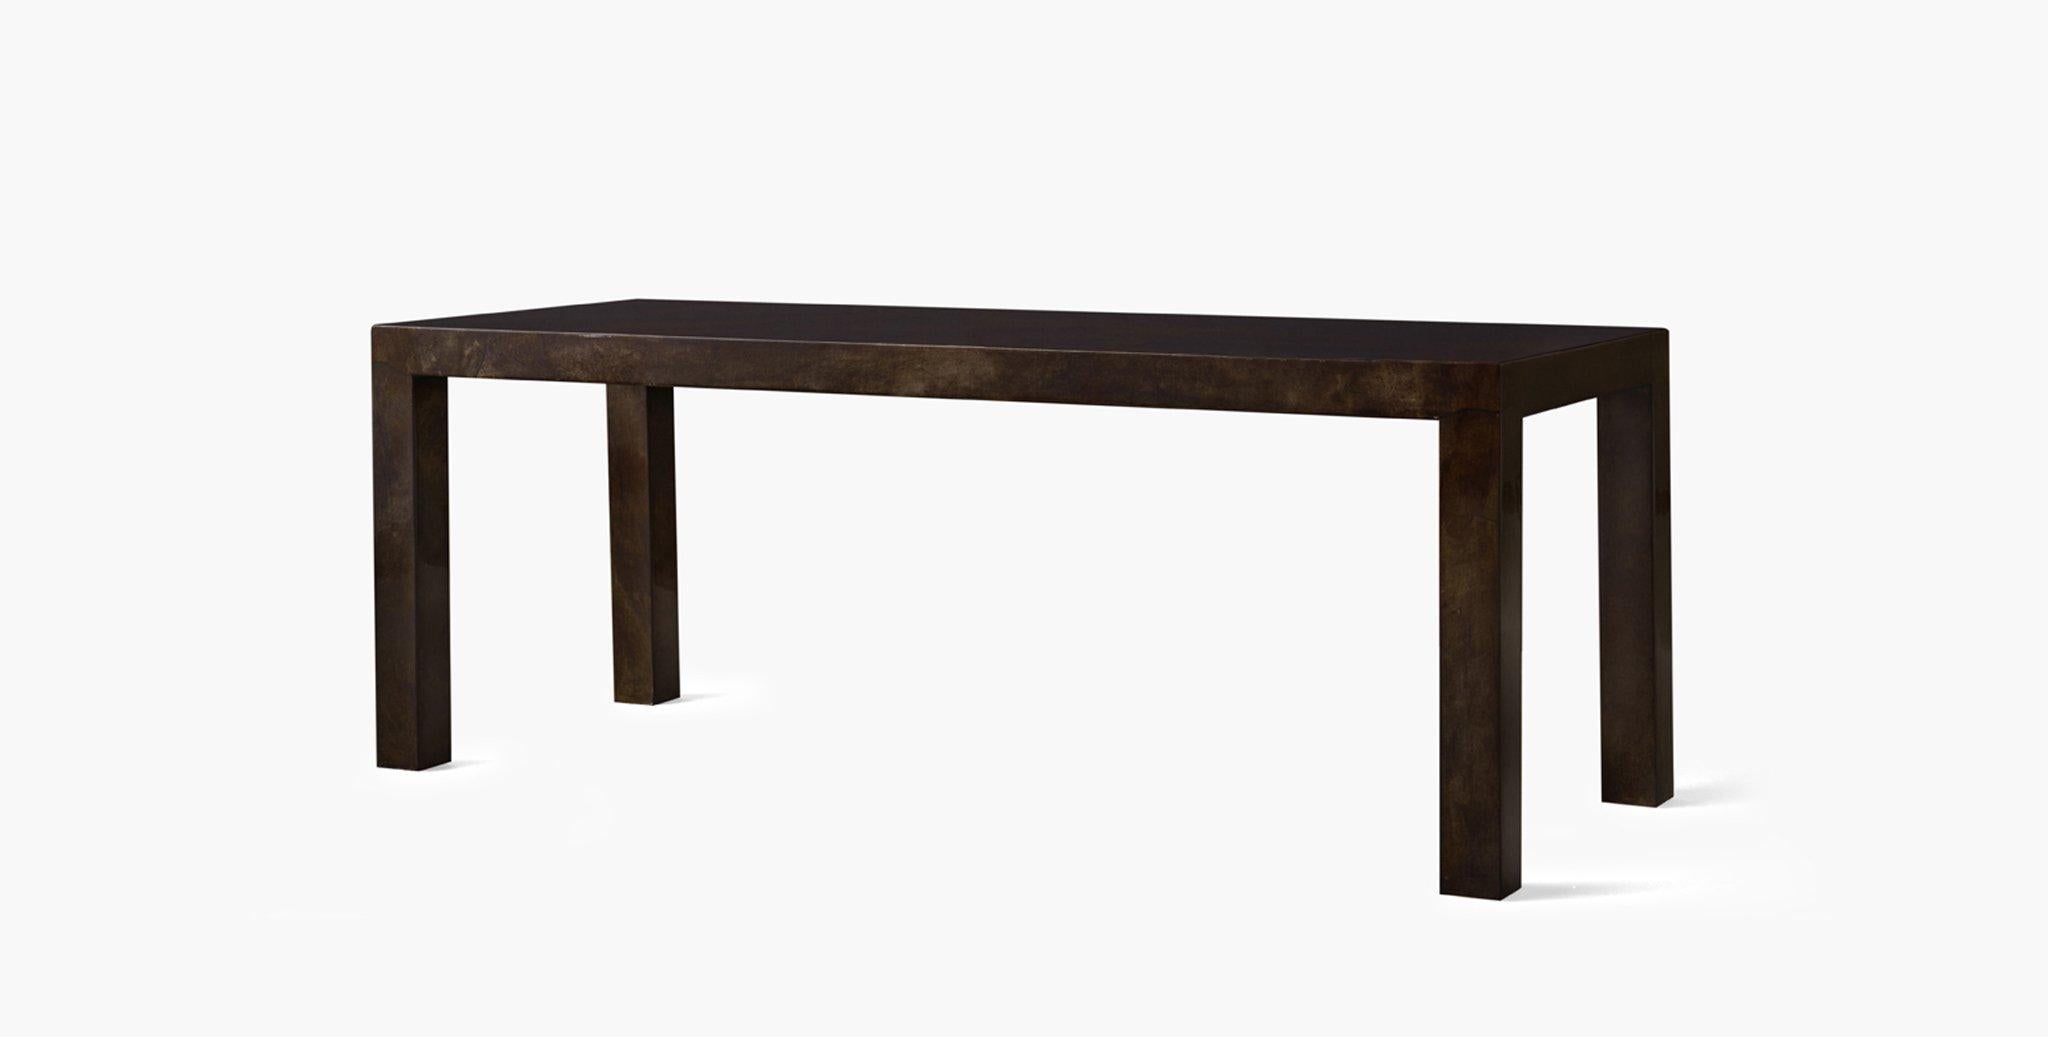 Our Arbor bench is a simple, utilitarian piece in the classic Parson's style, with squared legs and a classic modern silhouette. Our handcrafted finishes are inspired by the natural variations within fibers, textures, and weaves. Each selection is